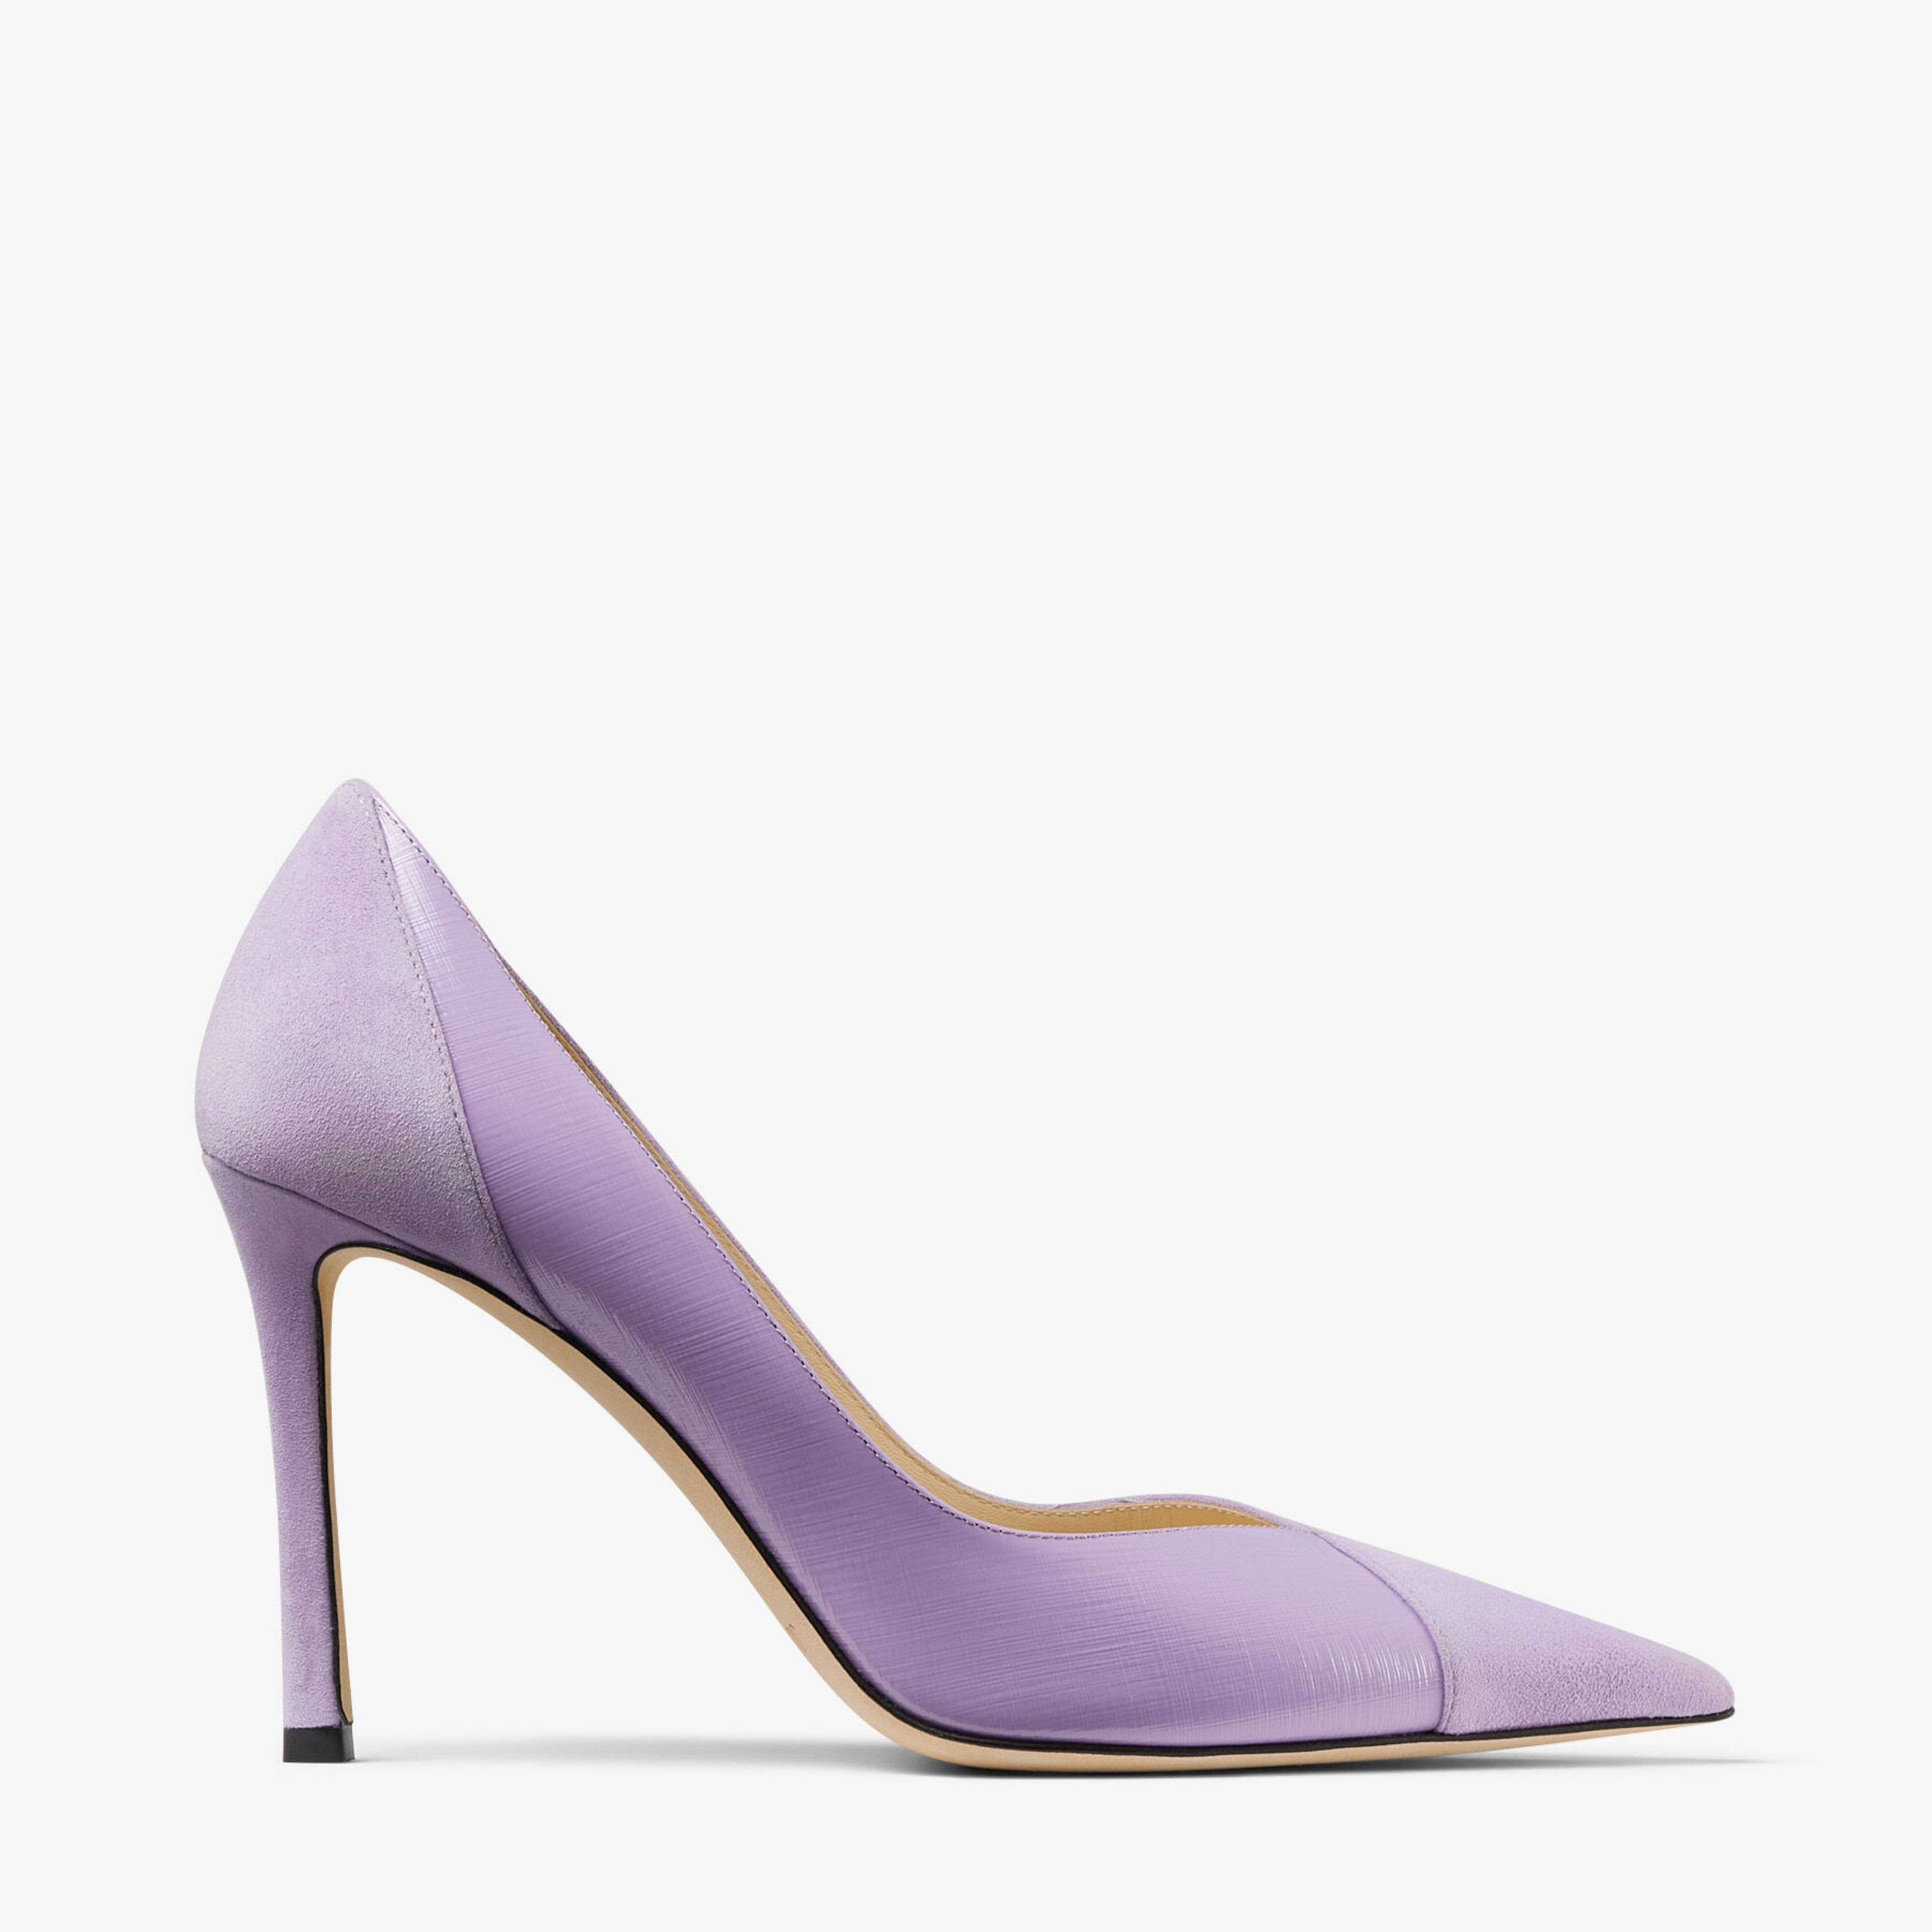 Jimmy Choo - Wisteria Suede and Etched Patent Leather Pumps